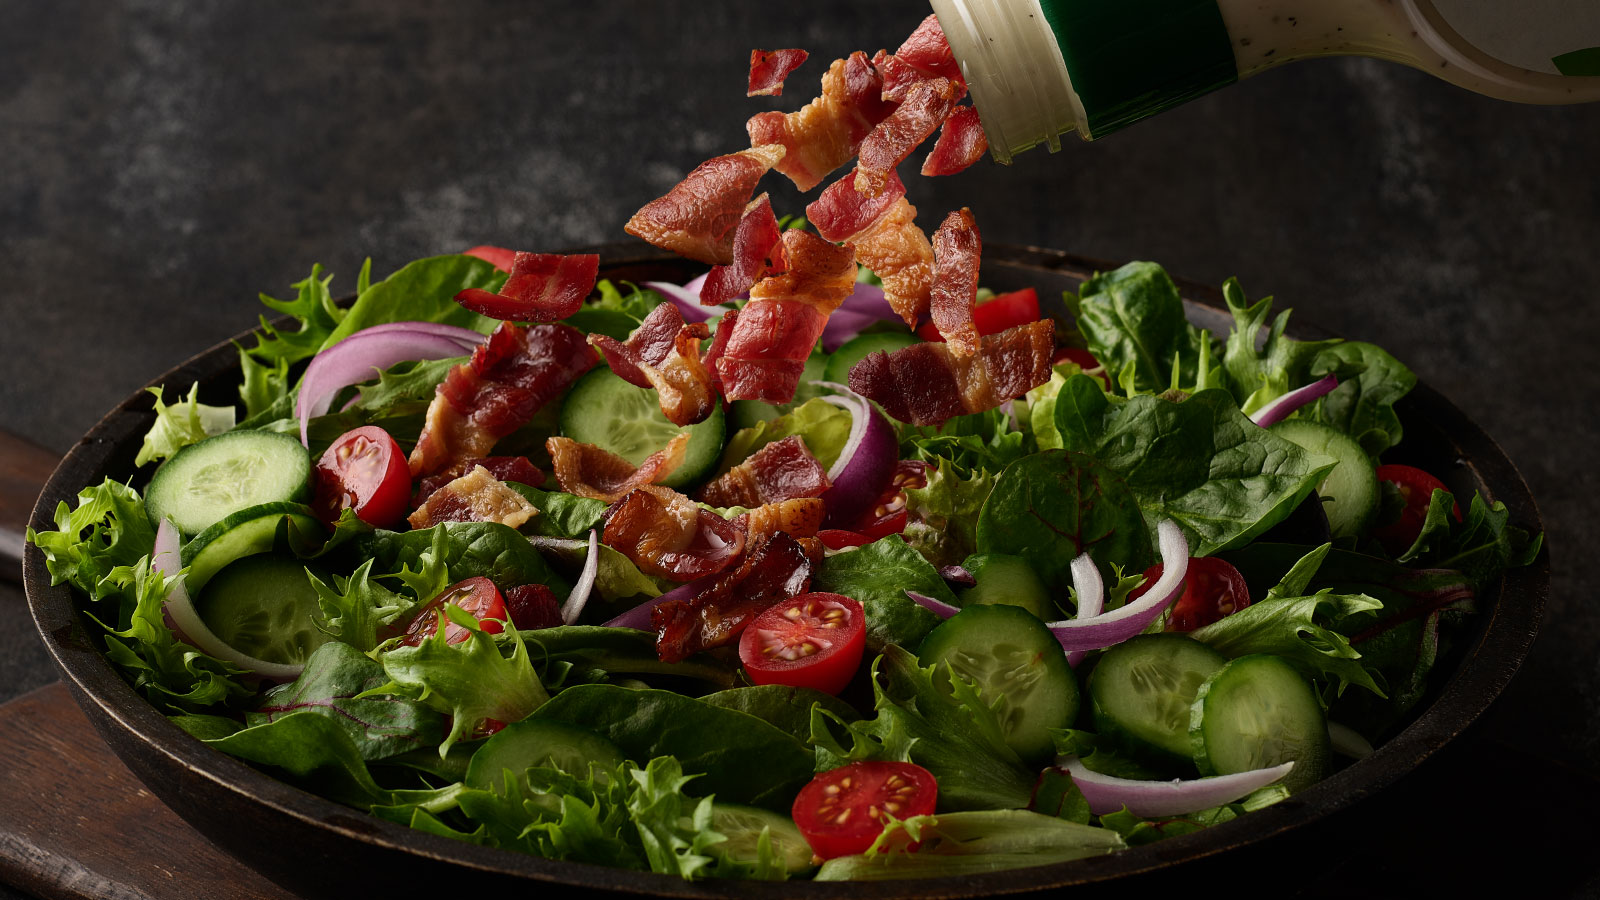 Ranch bacon pouring out of a ranch bottle onto a salad